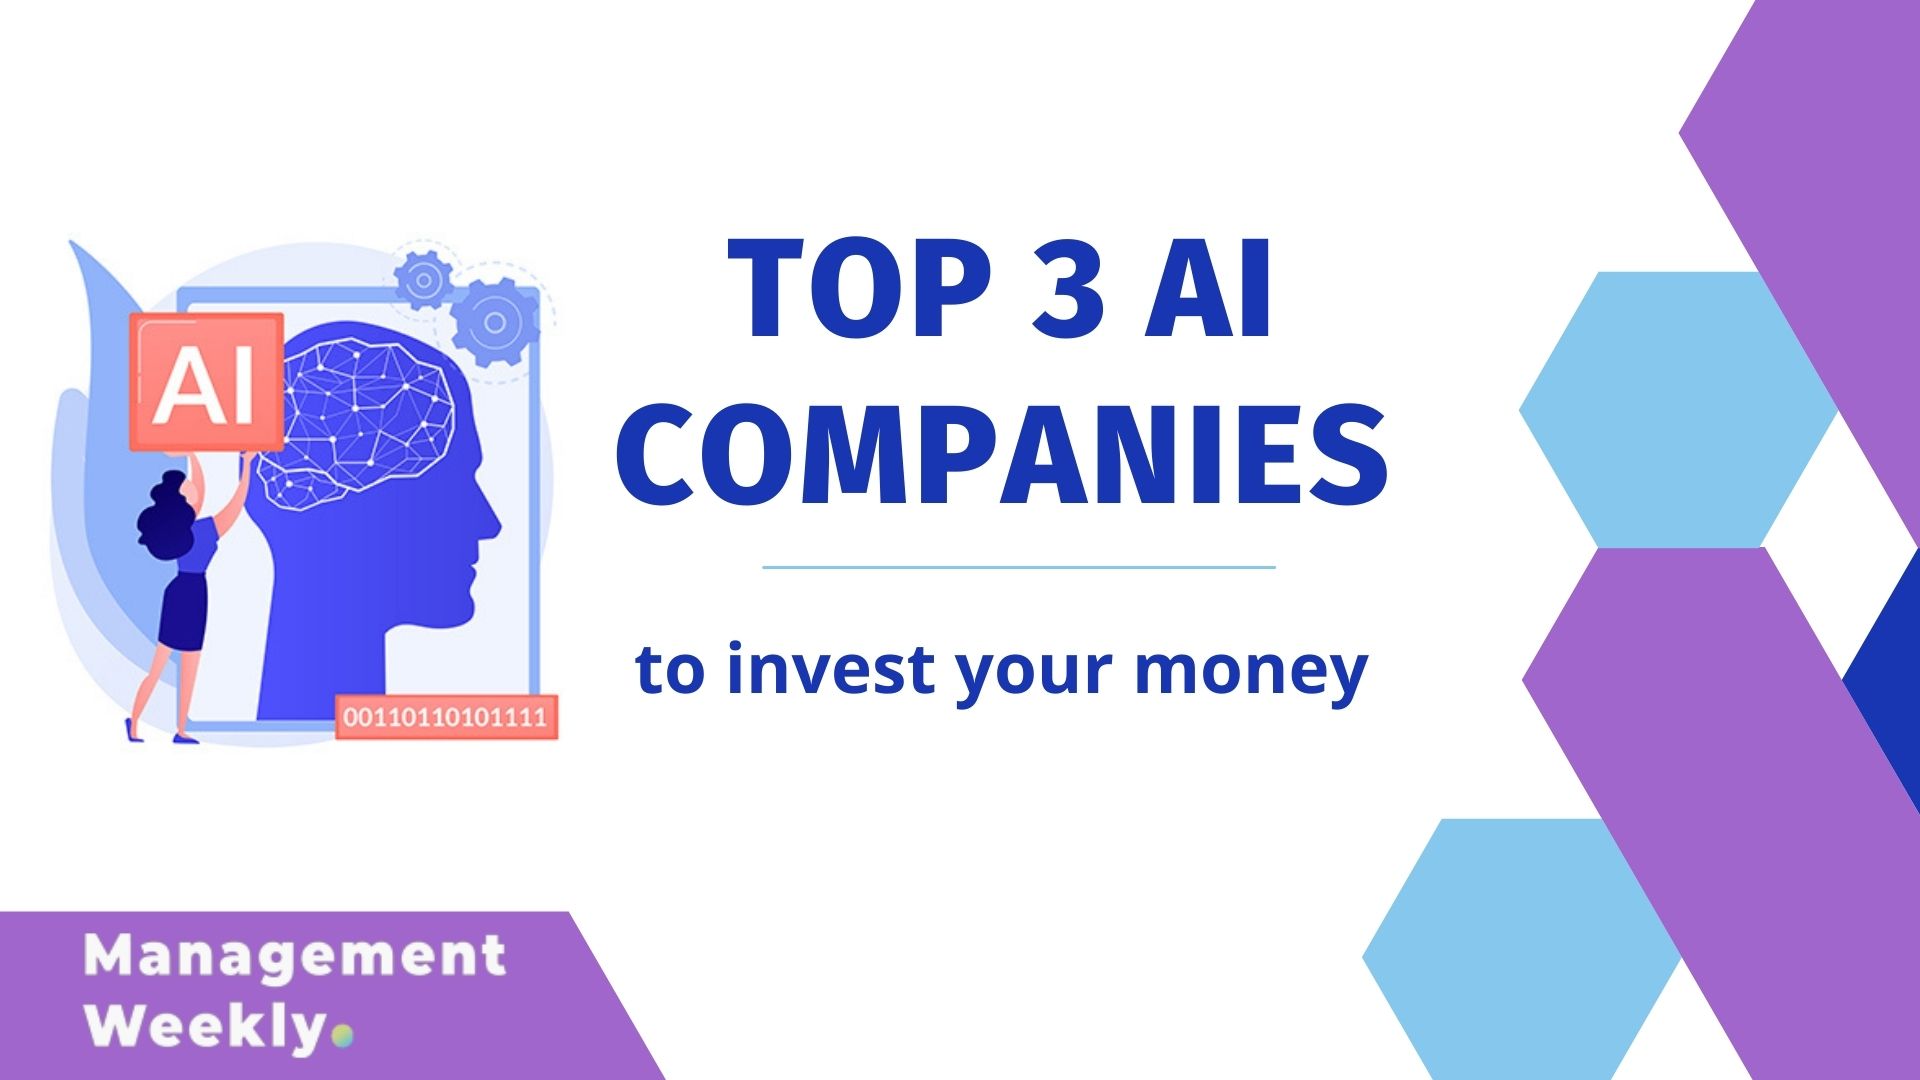 Top Ai companies to invest in